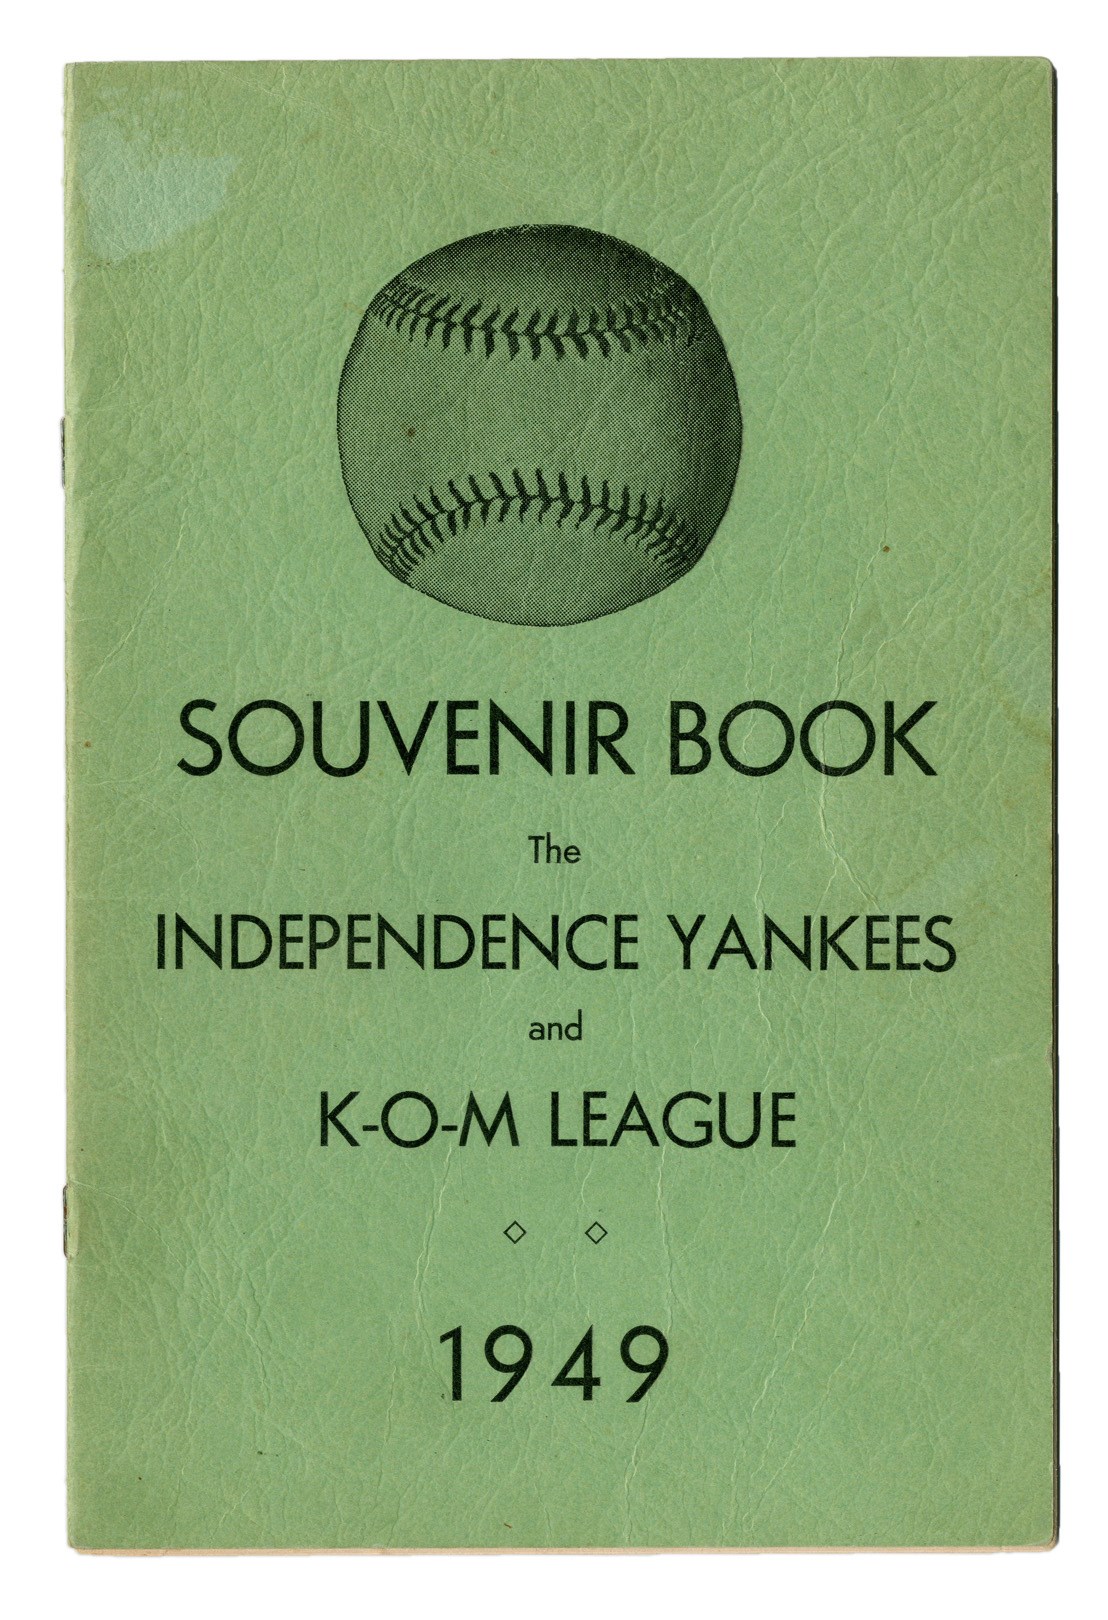 Mantle and Maris - 1949 Independence Yankees Yearbook featuring Mickey Mantle